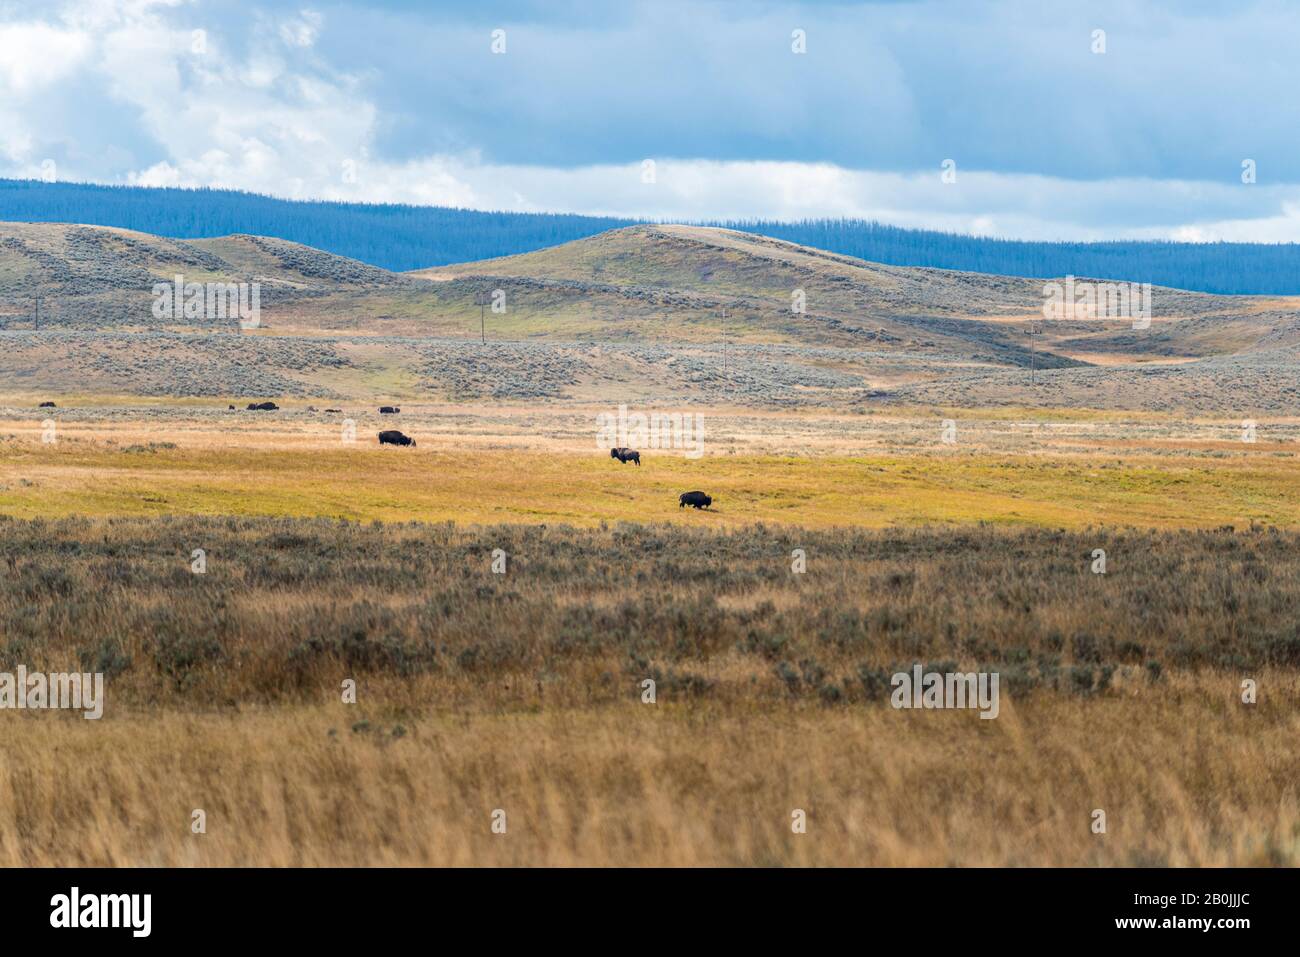 Wide open fields with yellow grass, animals, hills and mountains beyond under cloudy skies. Stock Photo